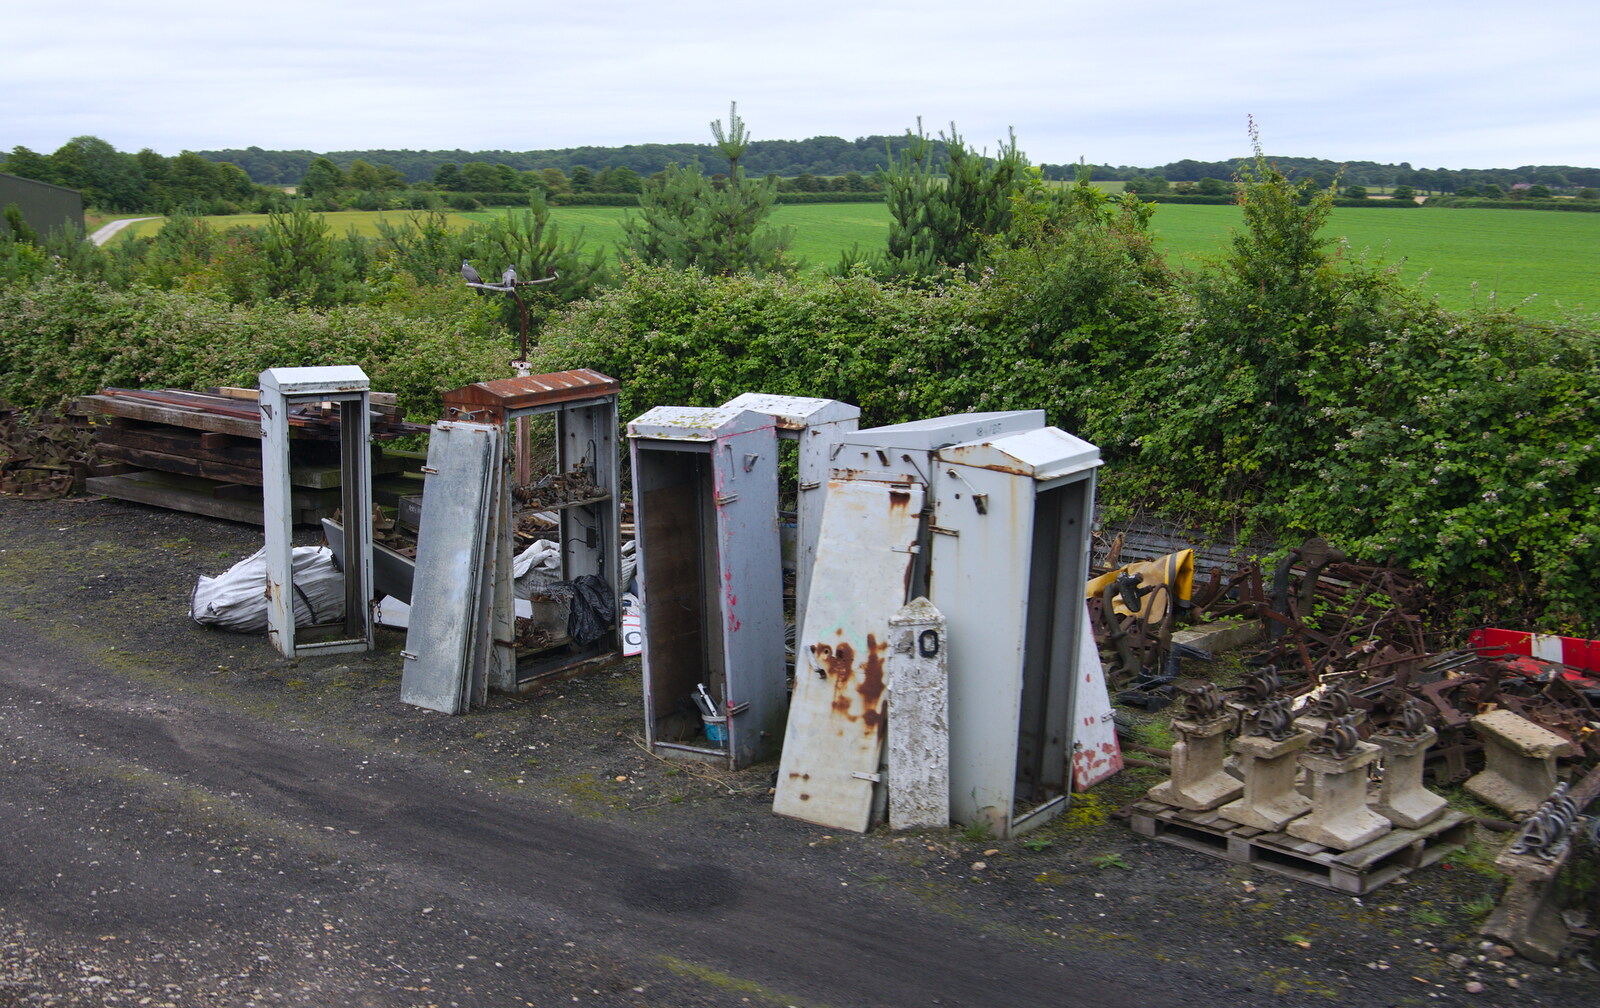 A pile of derelict signalling boxes from Kelling Camping and the Potty Morris Festival, Sheringham, North Norfolk - 6th July 2019